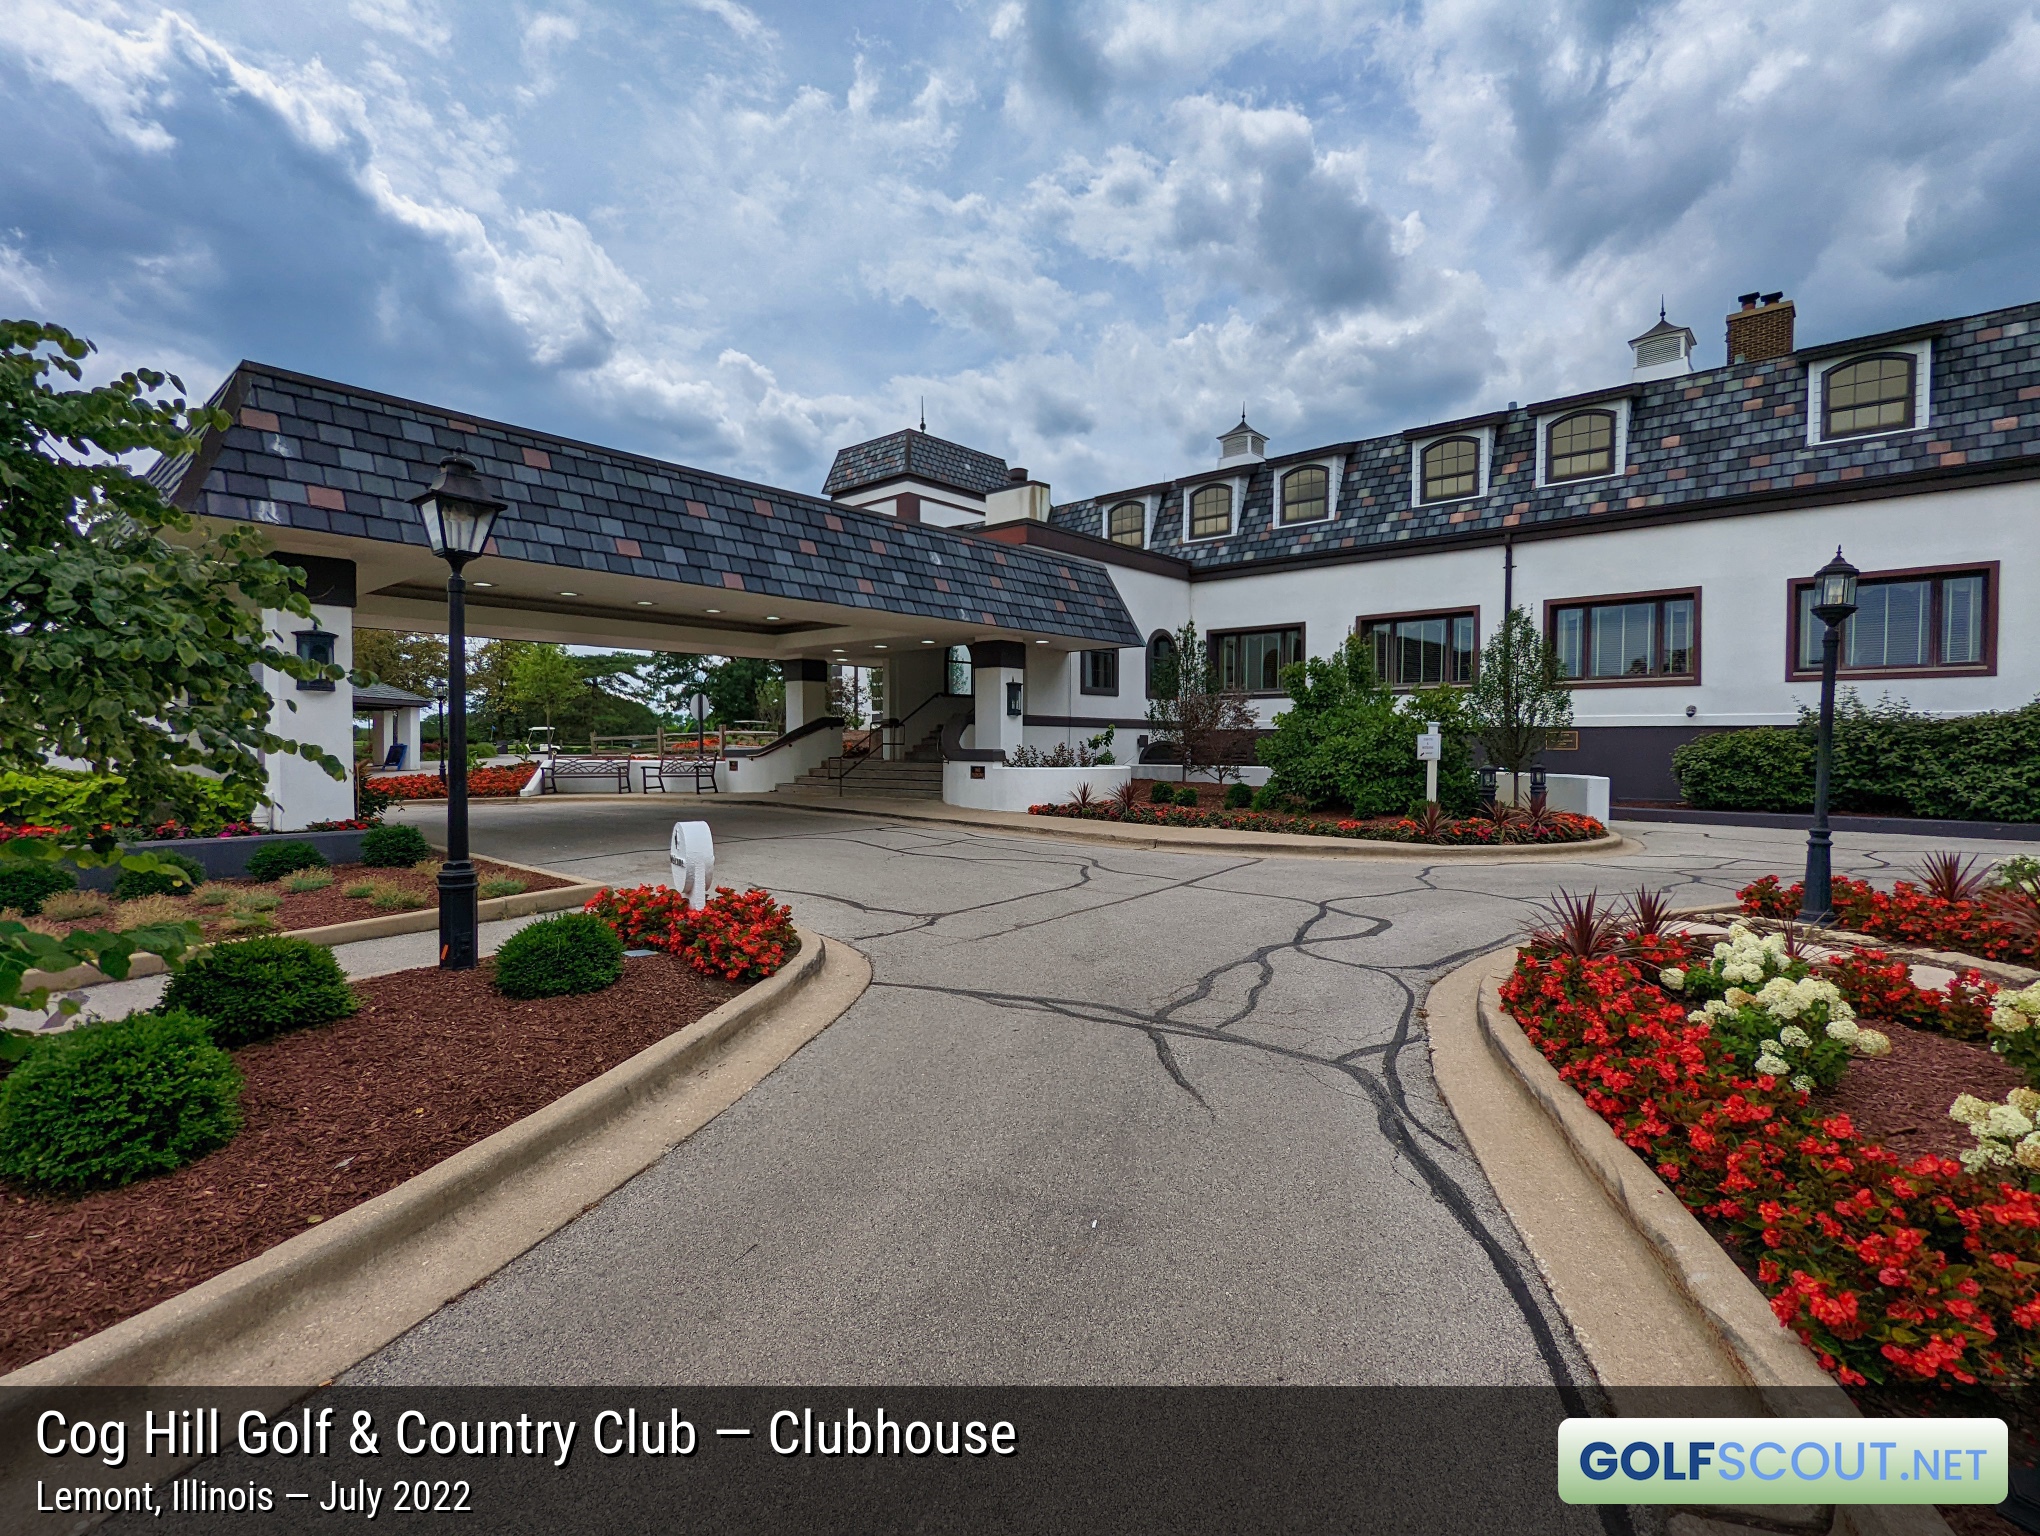 Photo of the clubhouse at Cog Hill Course #3 in Lemont, Illinois. The main clubhouse building at Cog Hill, from the driveway angle.